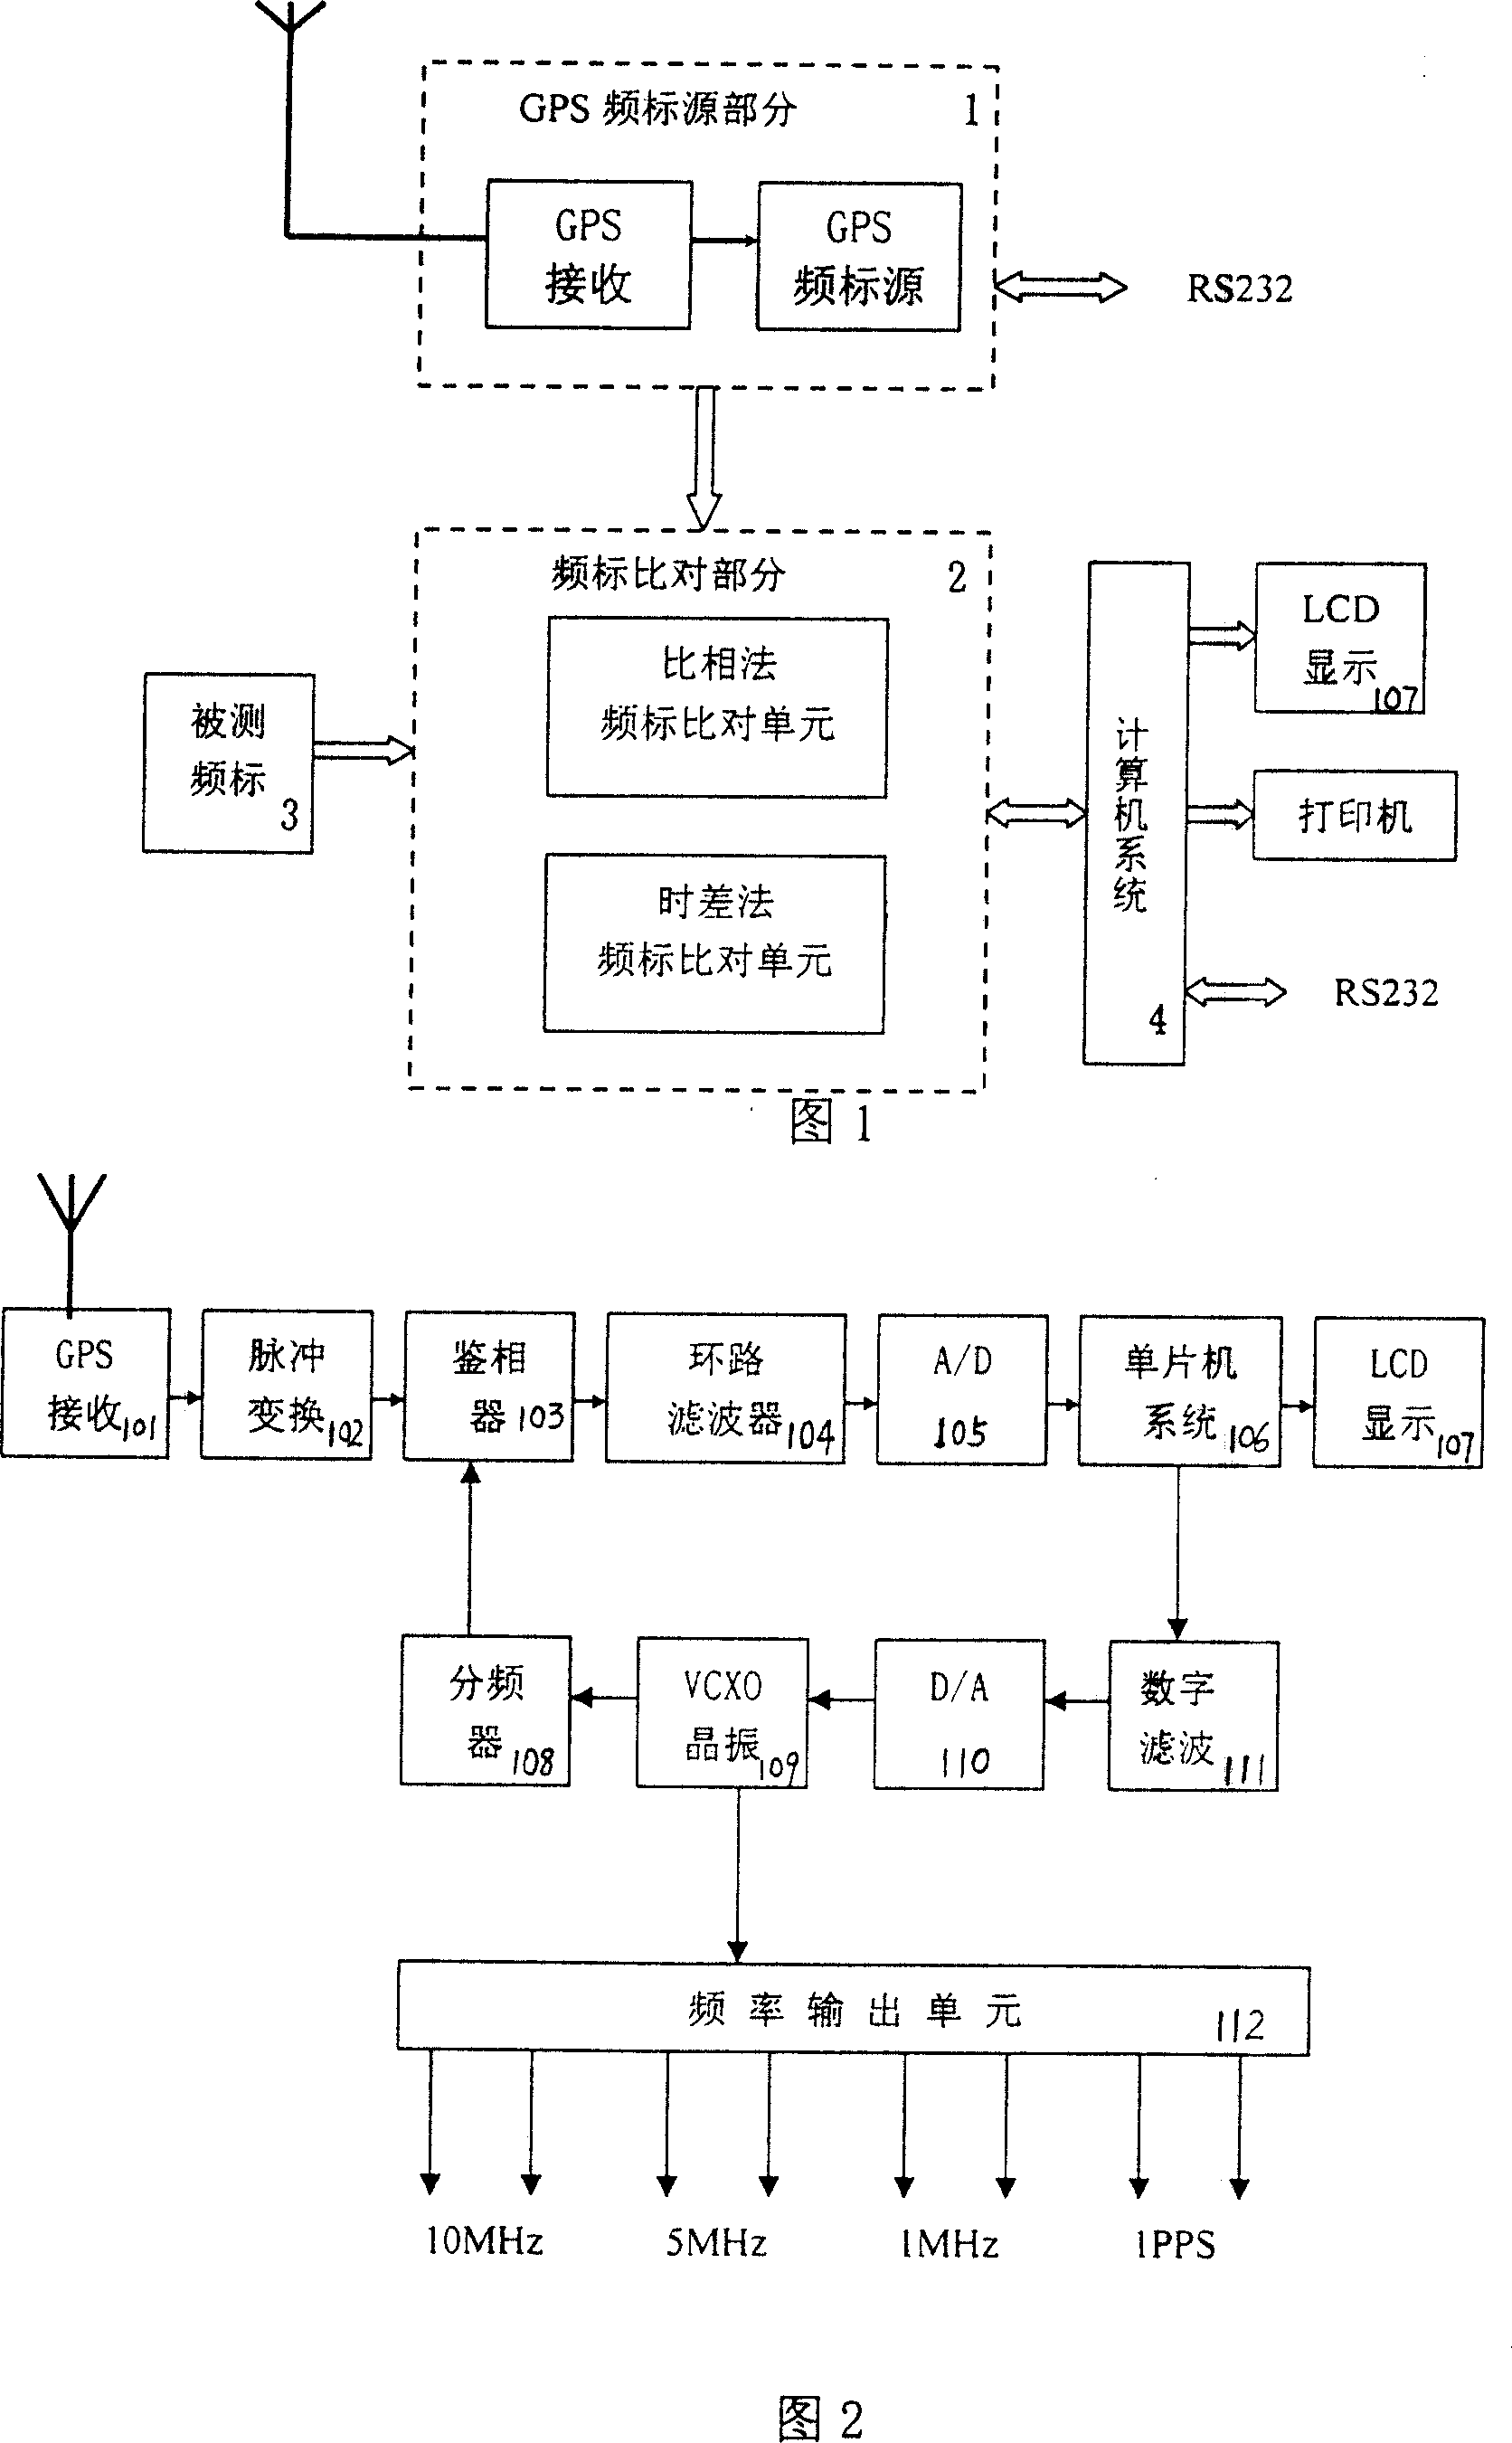 Frequency marker calibrating system based on GPS frequency standard source